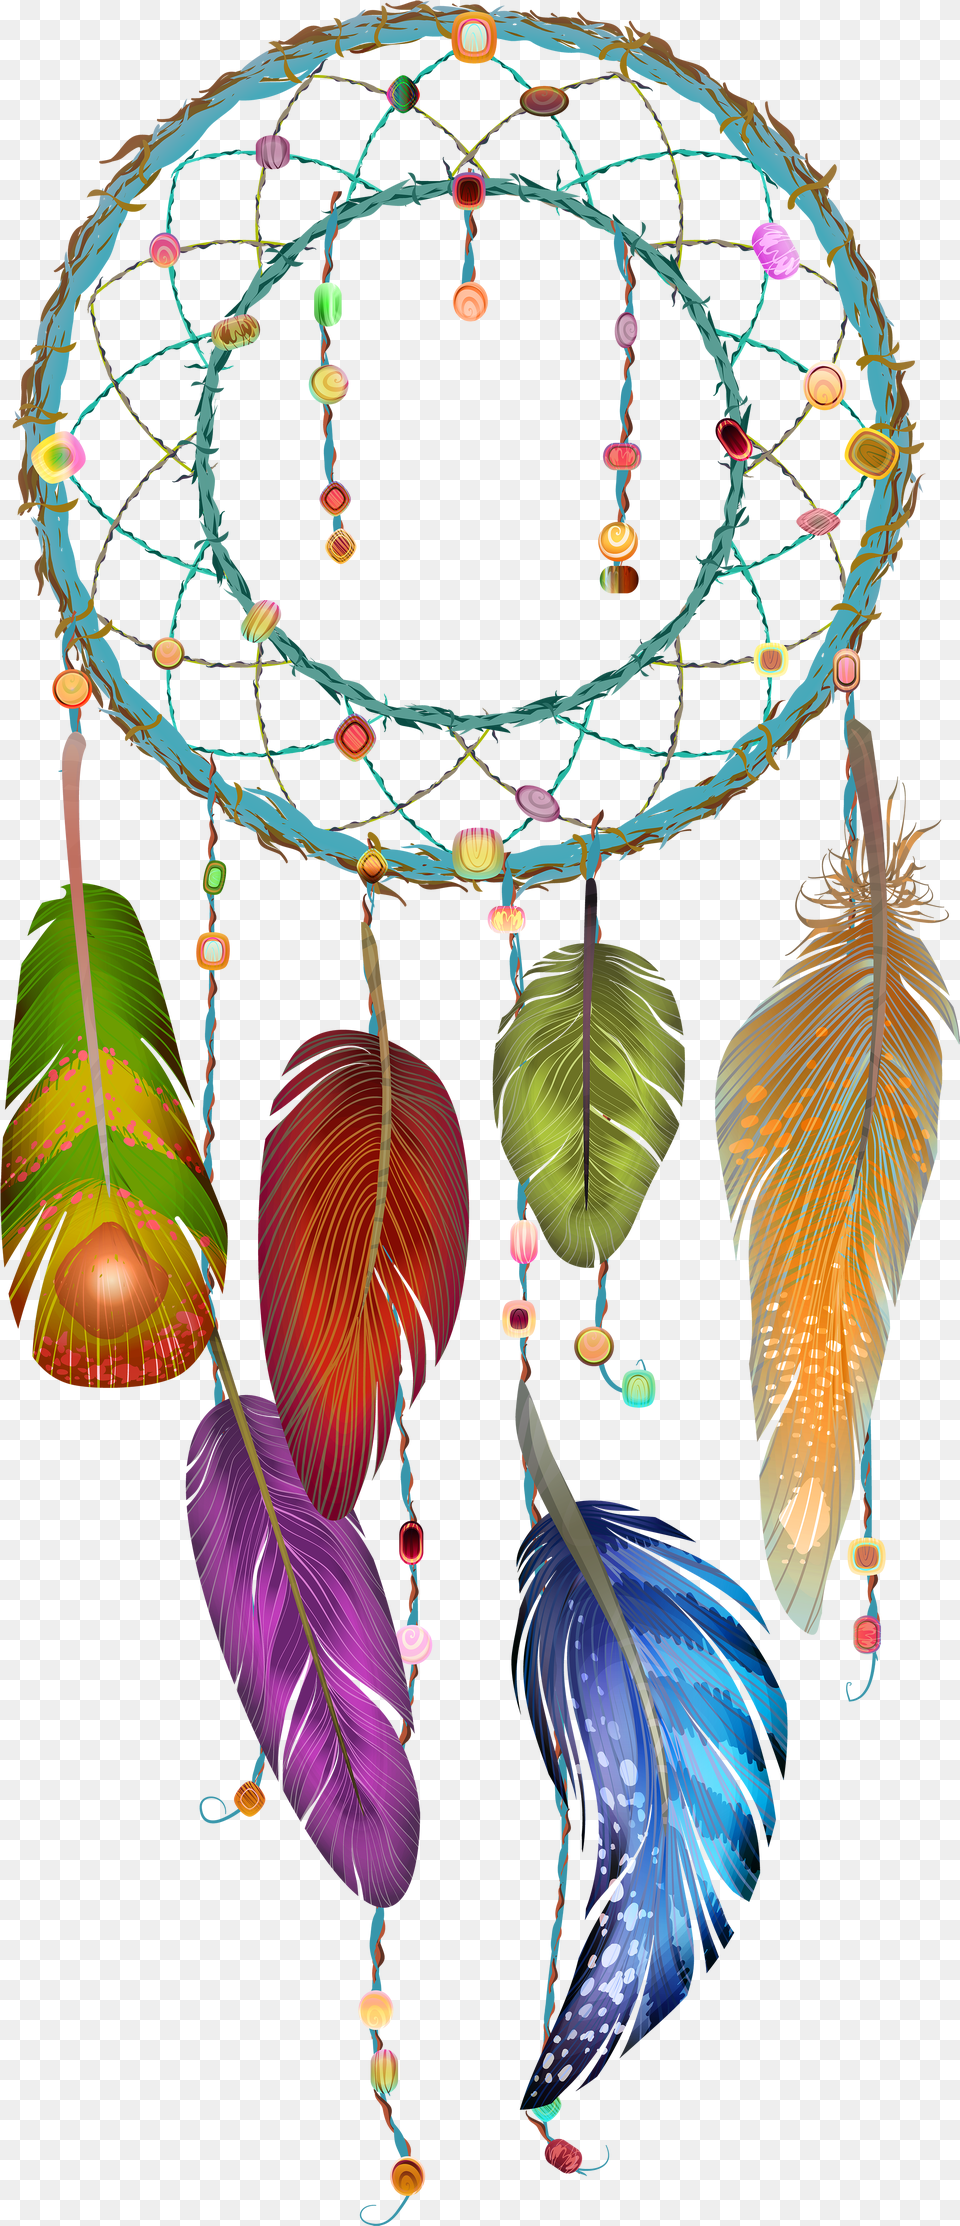 Pin By Lyutaya Naprimer On Dream Catcher Realistic Dream Catcher Drawing Png Image